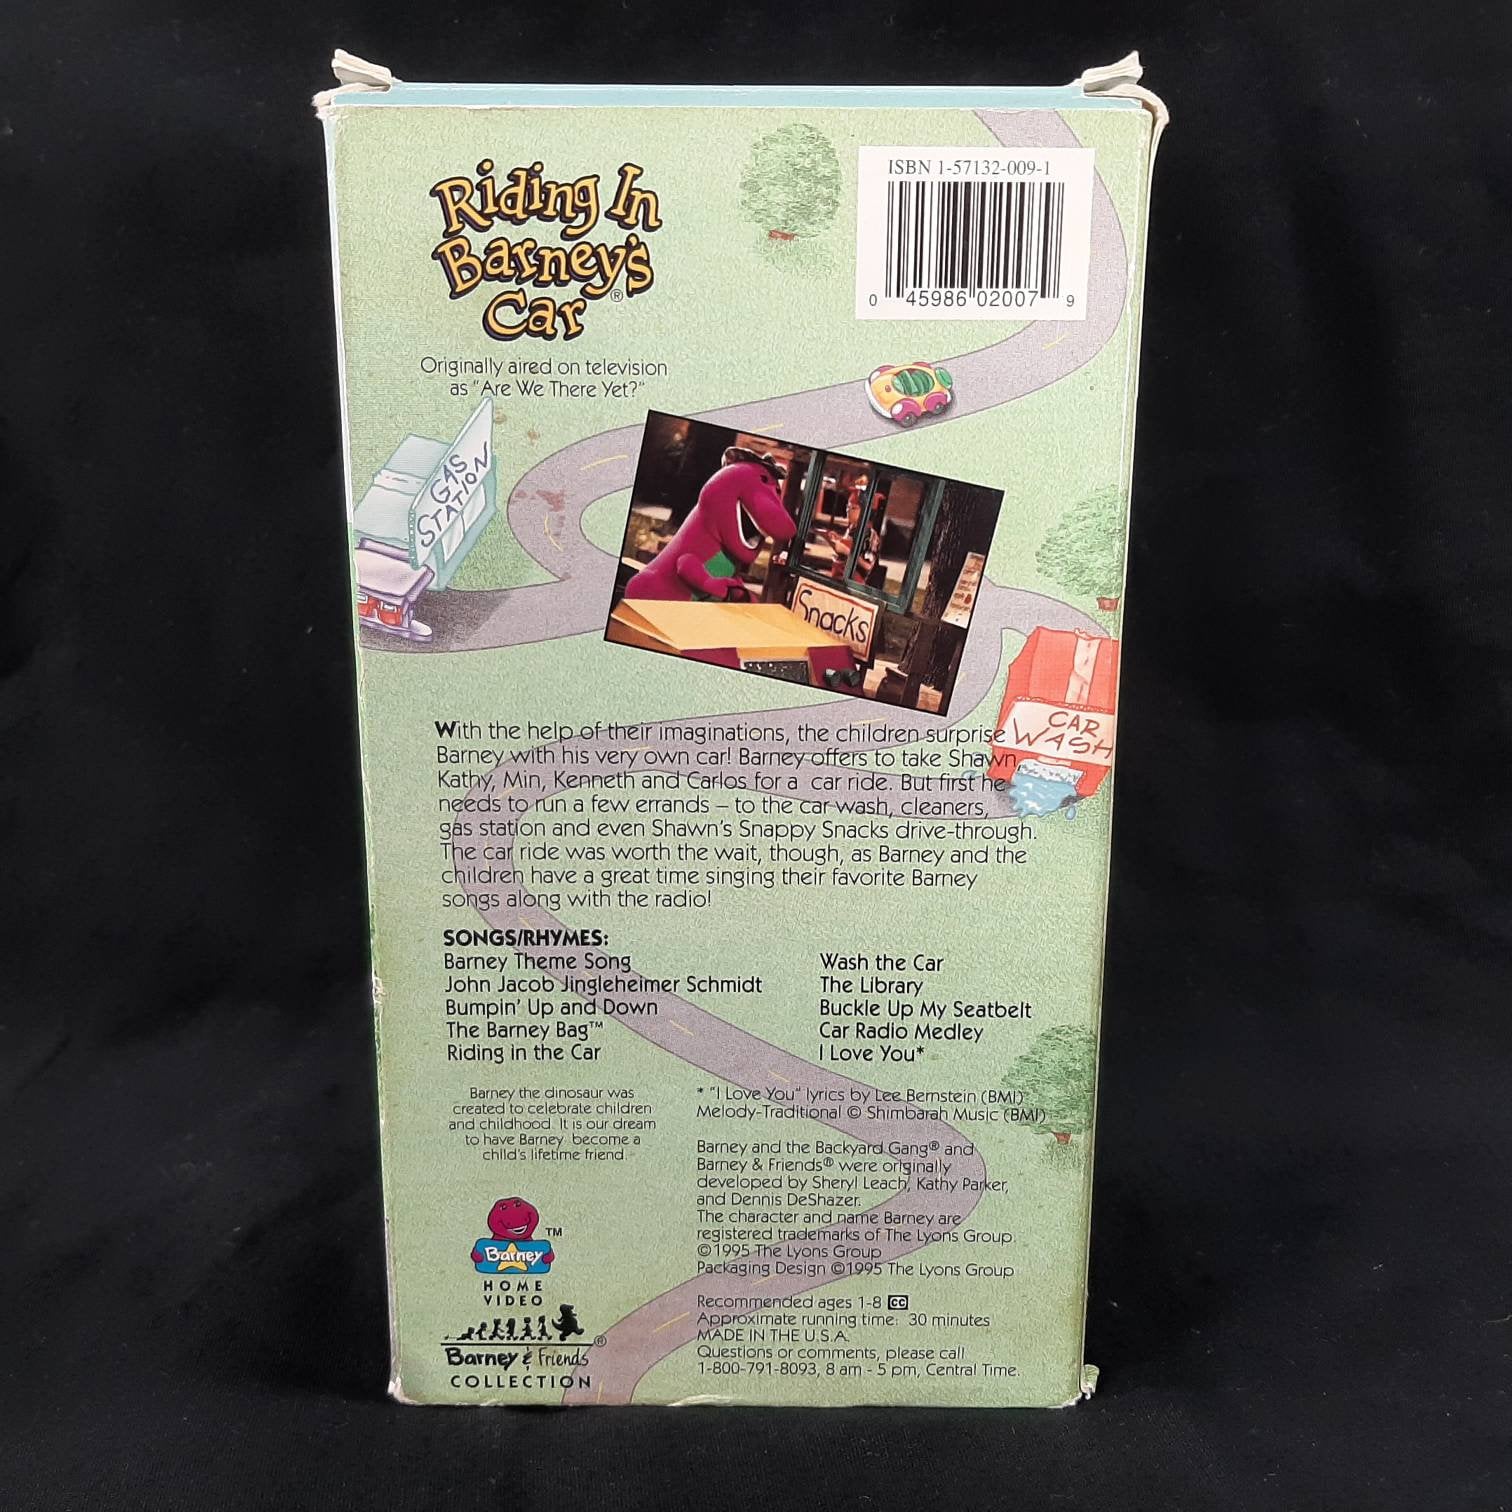 Barney Friends Collection VHS Riding in Barney's Car 1995 - Etsy Canada